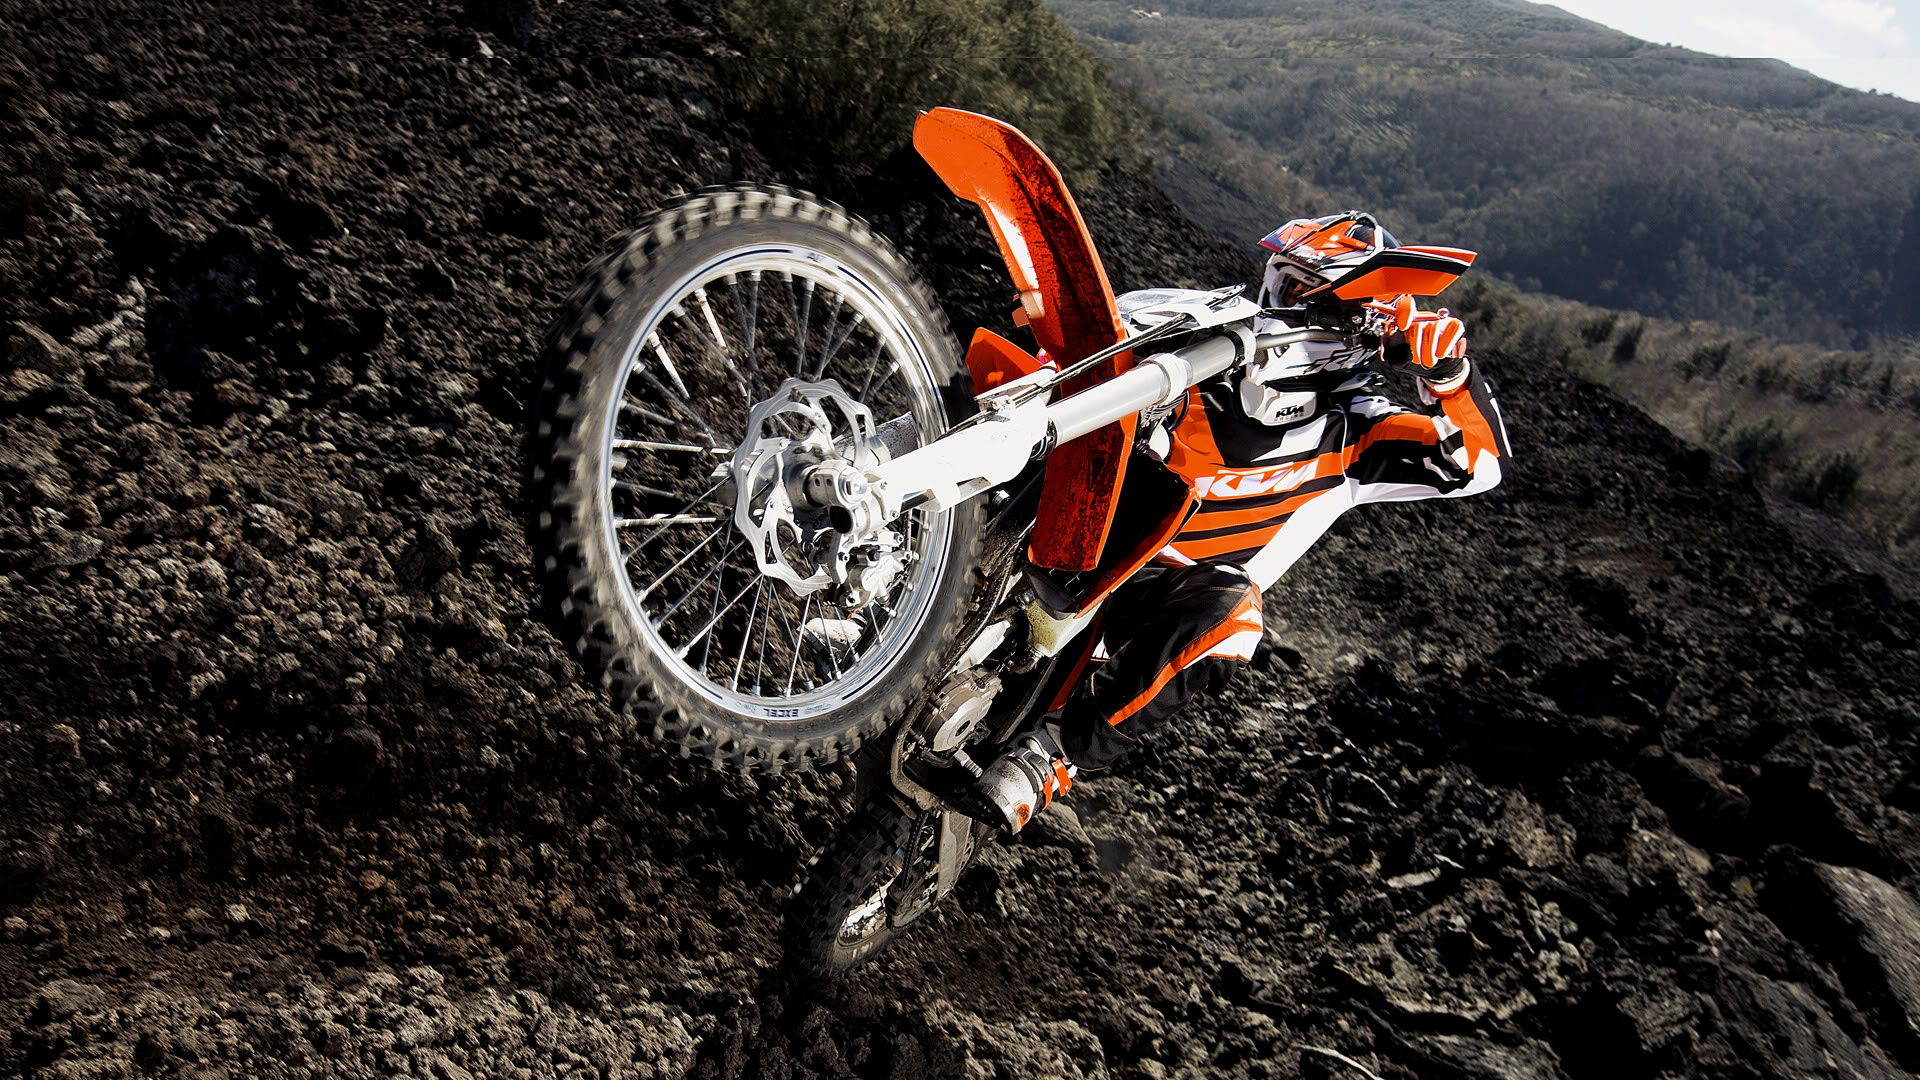 KTM 250 EXC, Exciting wallpapers, Powerful performance, Off-road excellence, 1920x1080 Full HD Desktop